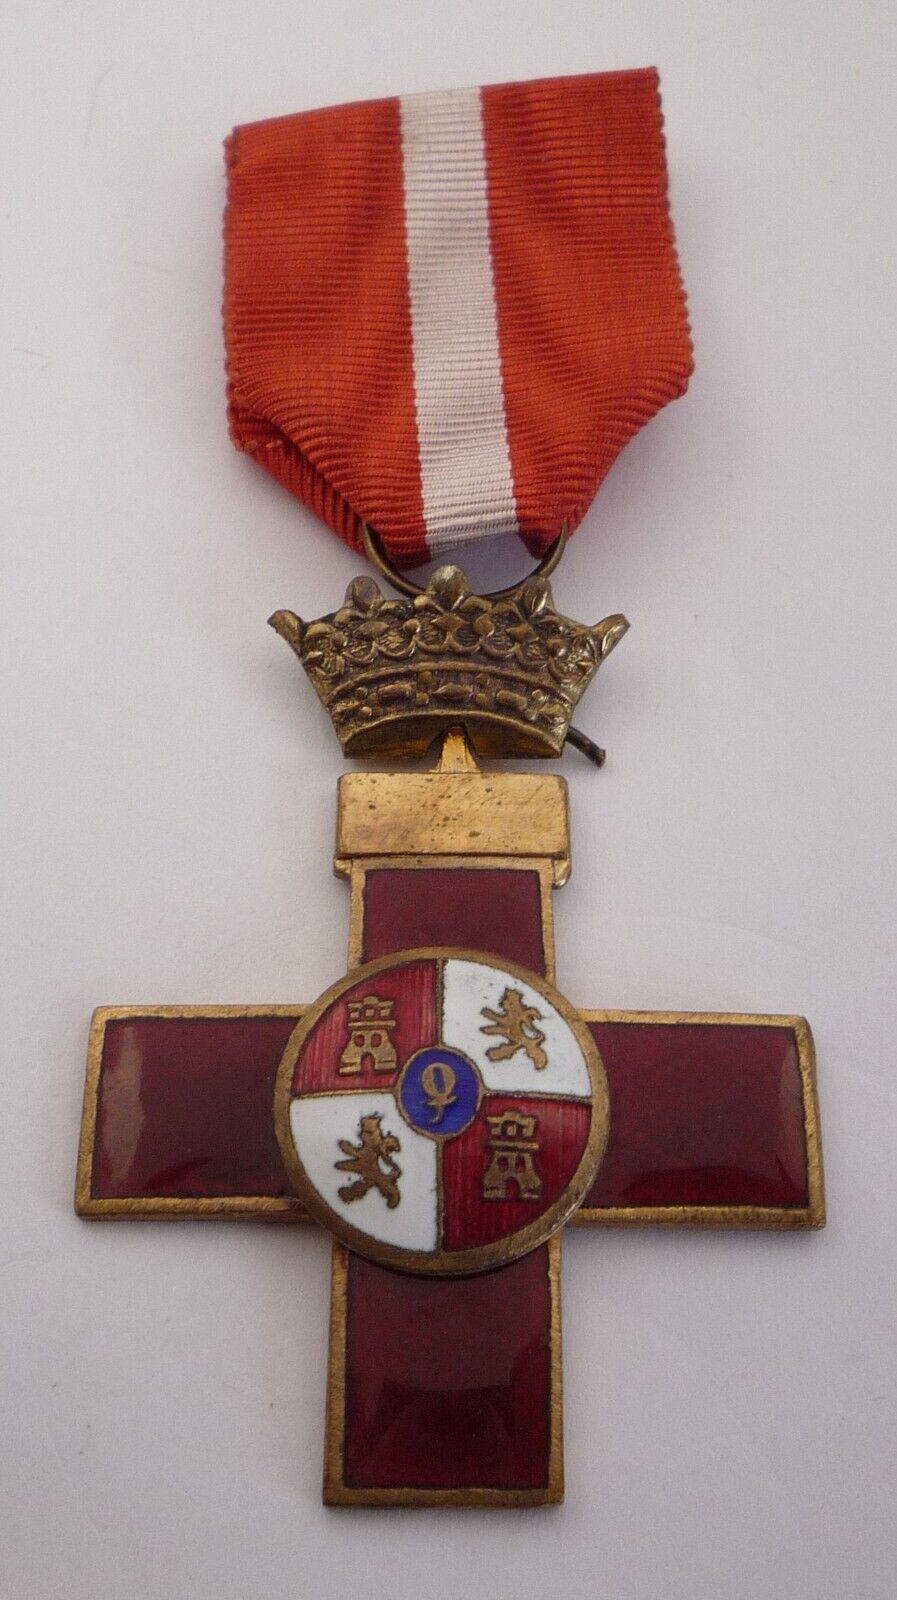 SPAIN / SPANISH ORDER OF MILITARY MERIT MEDAL WITH RED DISTINCTION